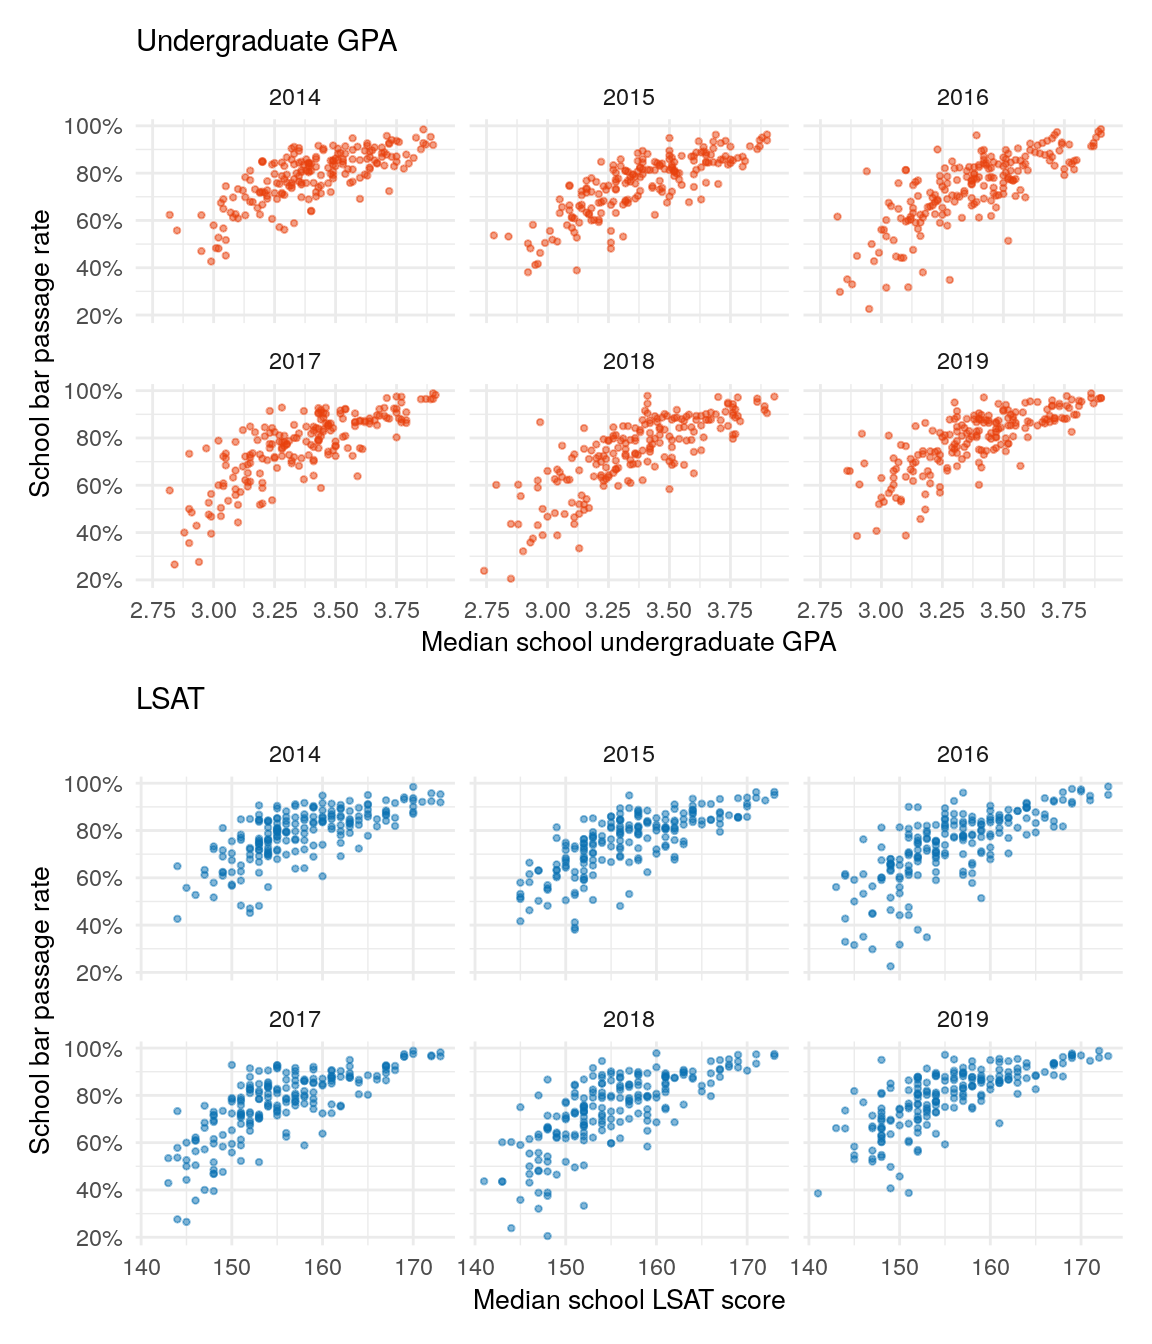 The top plot shows the relationship between a school's median undergrad GPA and bar passage rate. The bottom plot highlights the relationship between median LSAT and bar passage. Both median undergrad GPA and median LSAT correlate with bar passage.